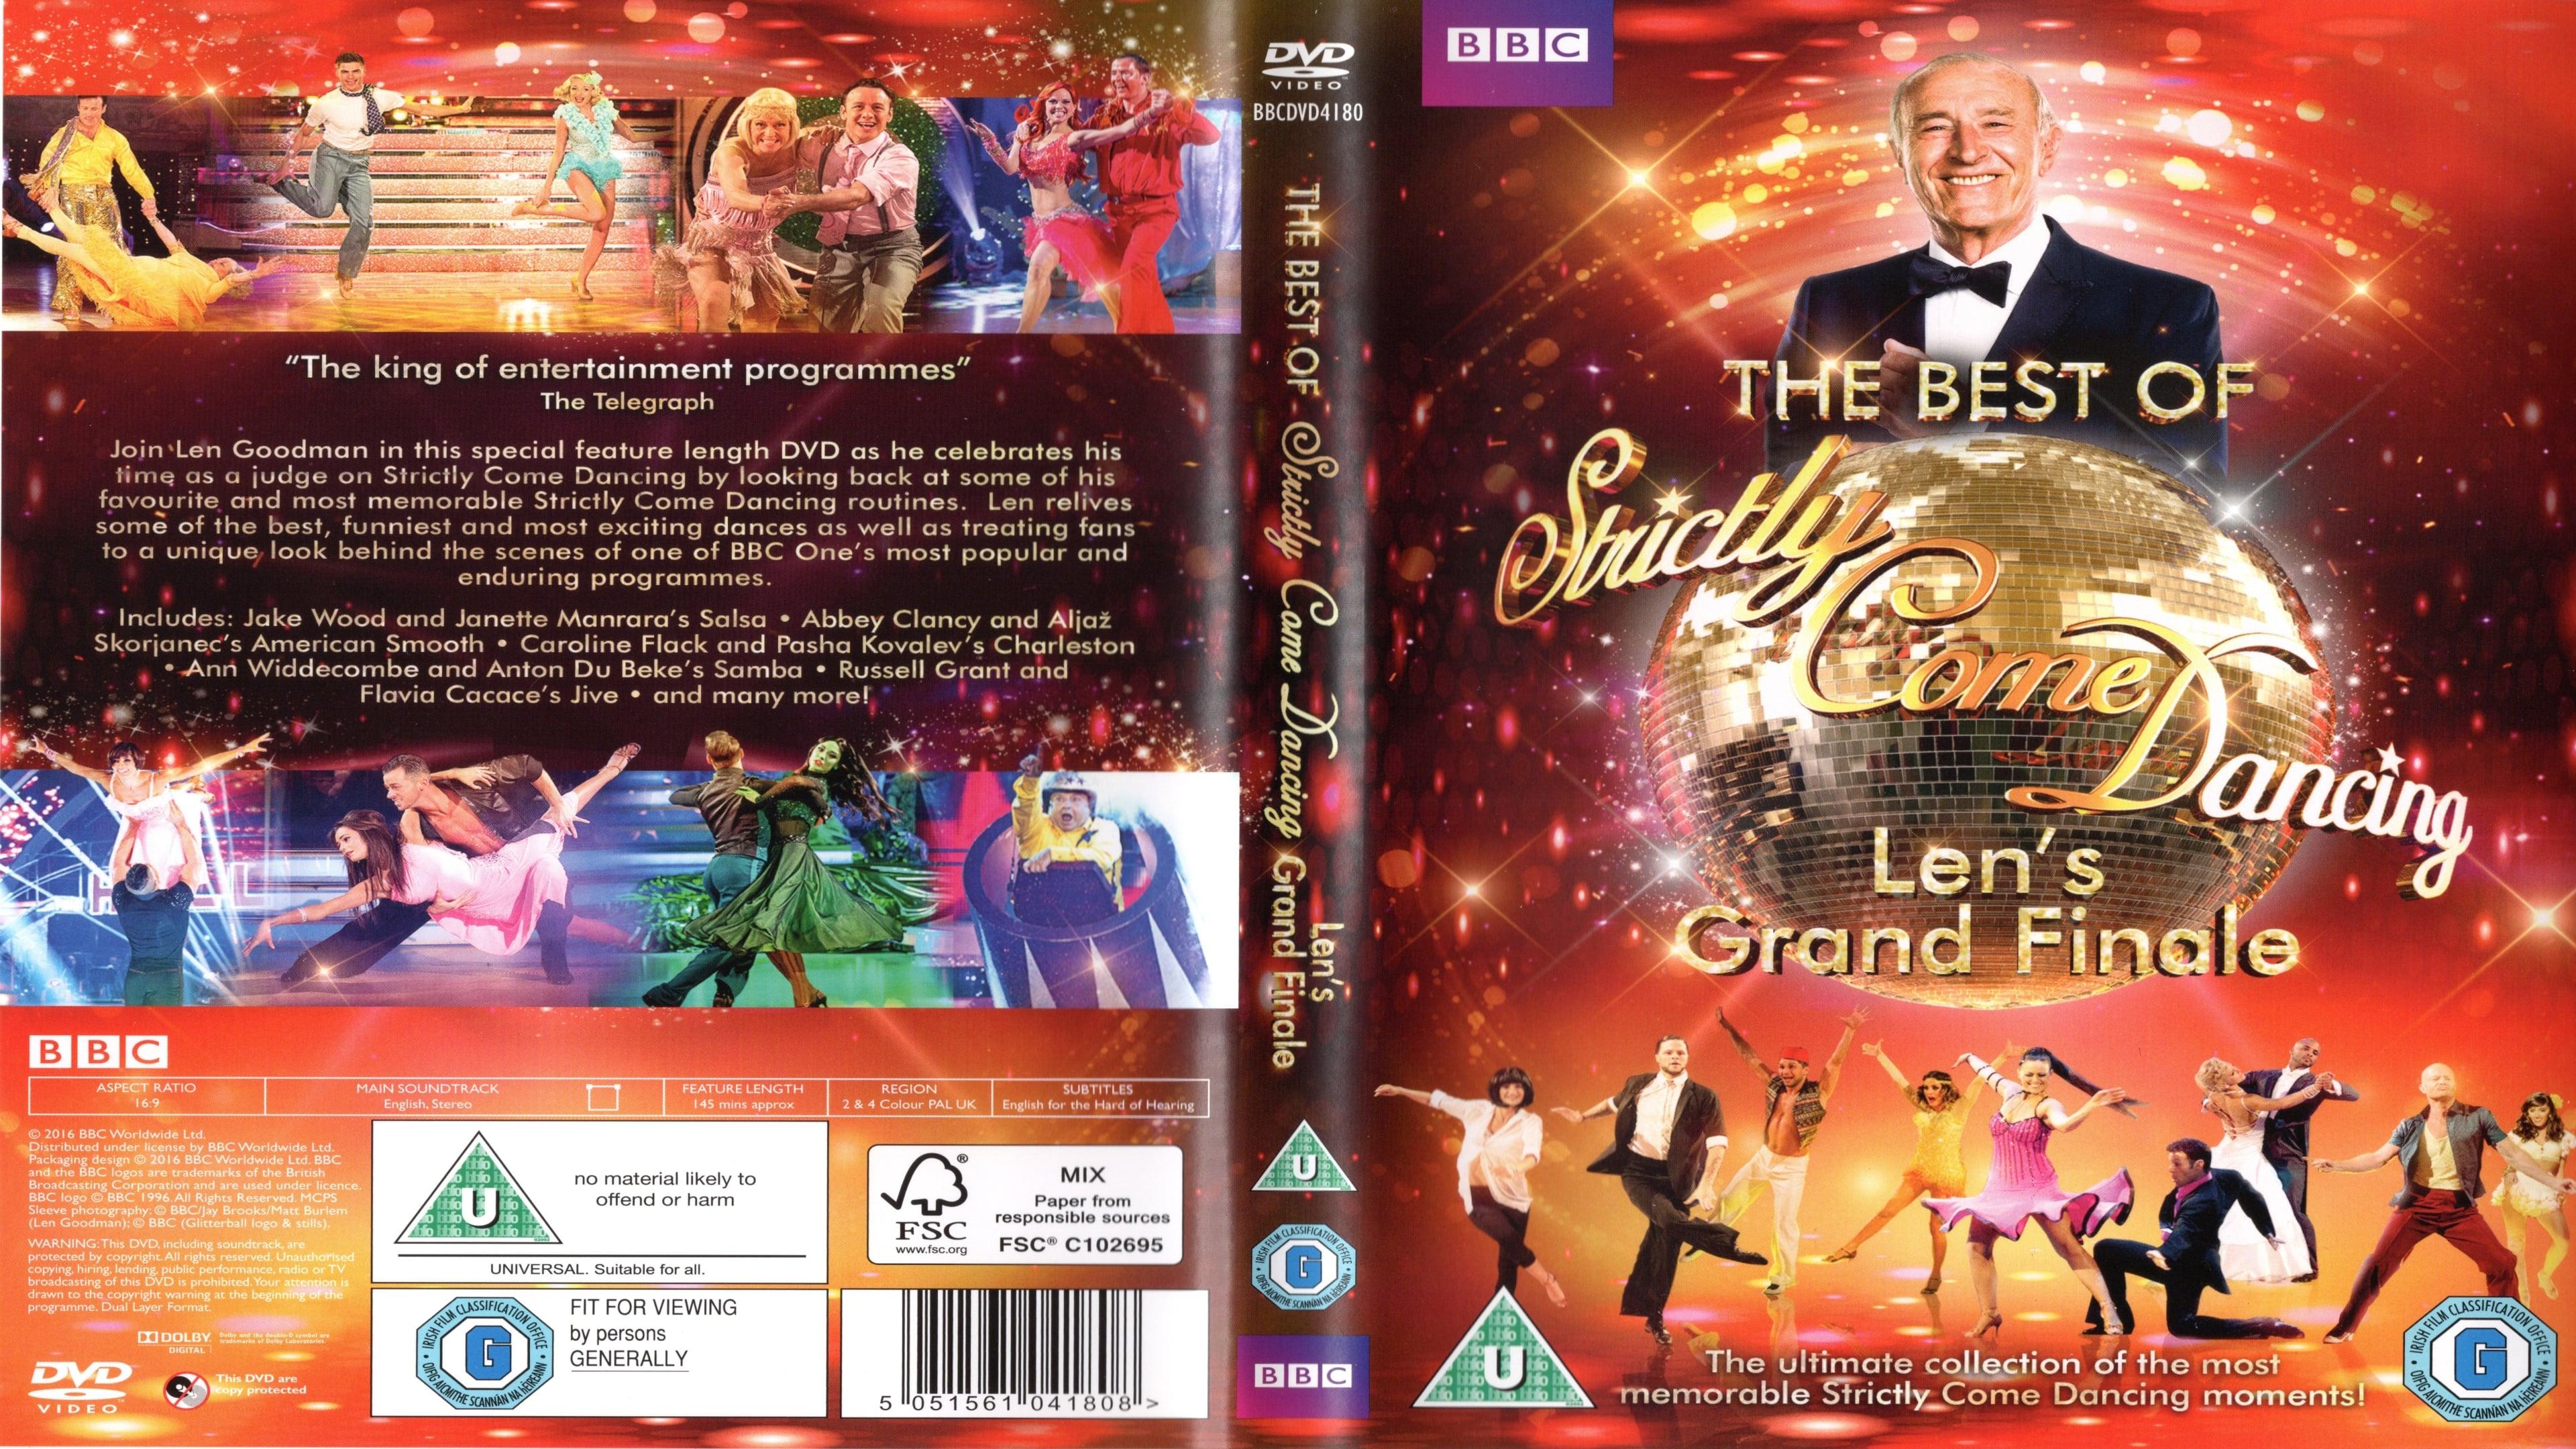 The Best of Strictly Come Dancing - Len's Grand Finale backdrop